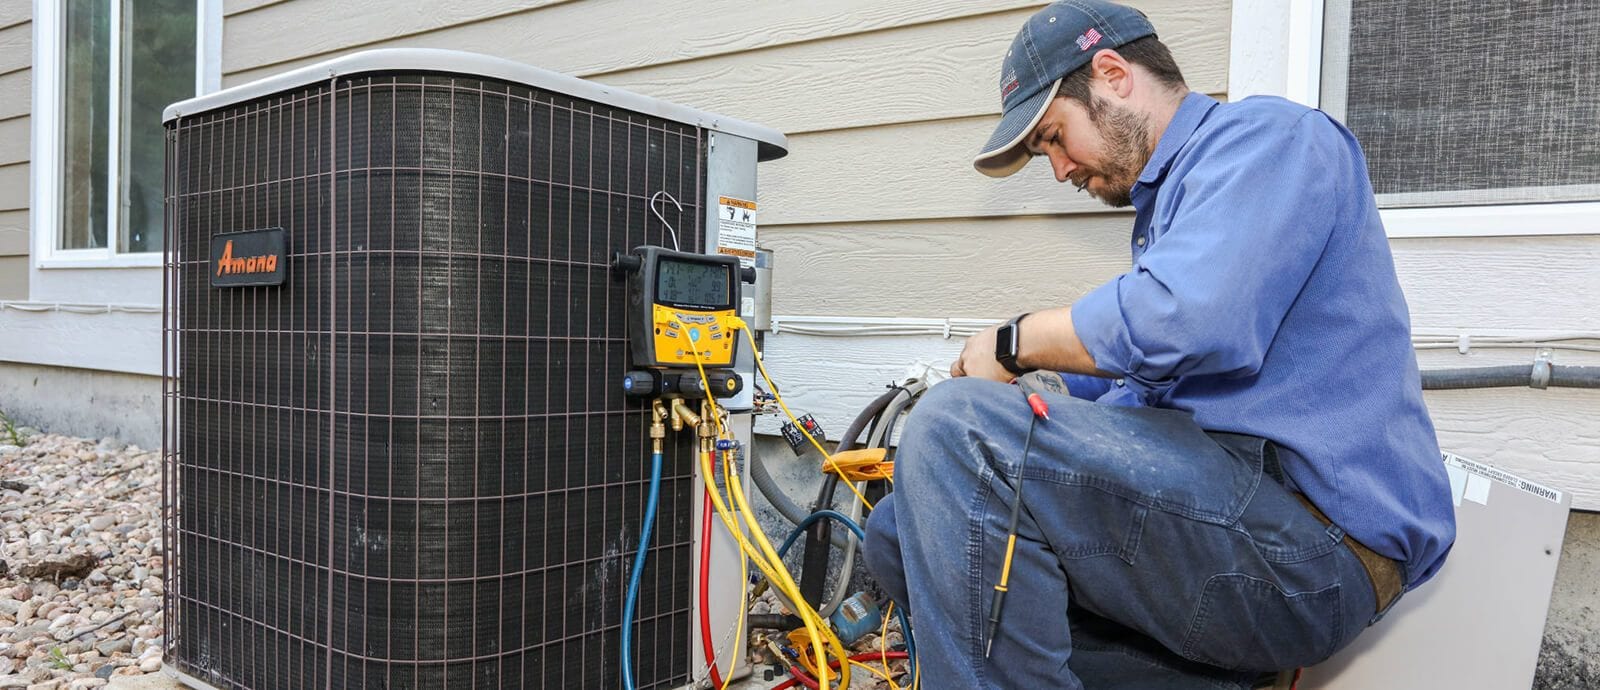 Go Green Heating & Air Conditioning - Arvada, CO, US, hvac contractor arvada